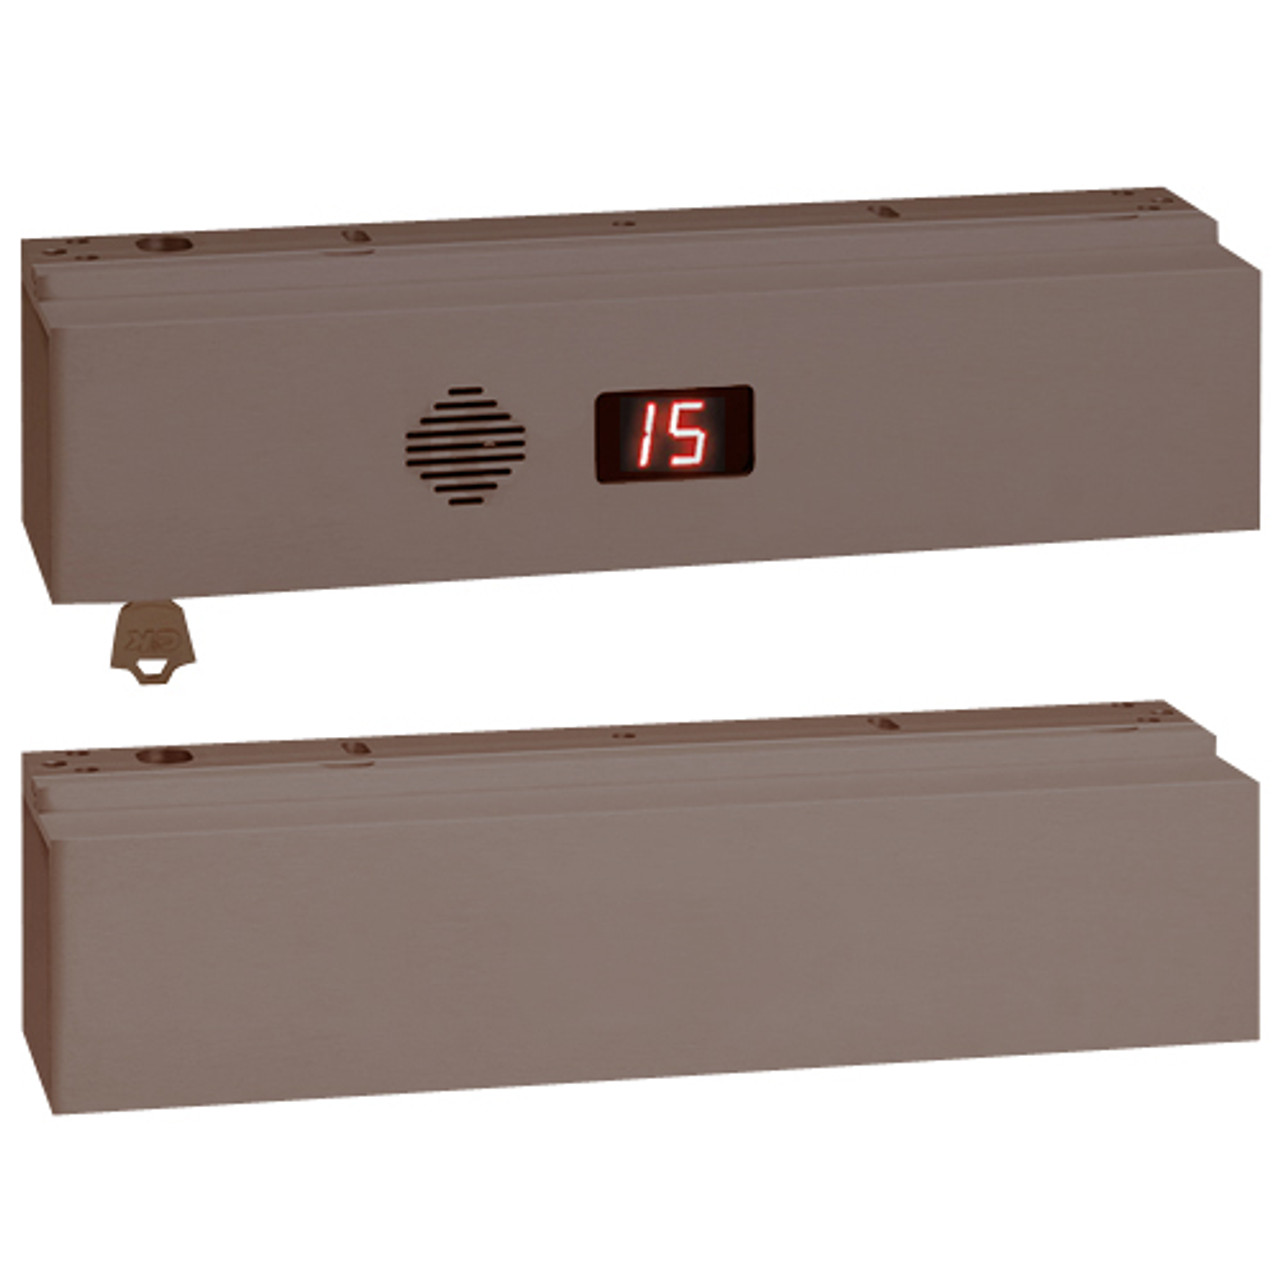 1511T-BC-K-X-D2B2A2 SDC 1511T Series Tandem Integrated Delayed Egress Locks with Door Position Status and Magnetic Bond Sensor in Dark Bronze